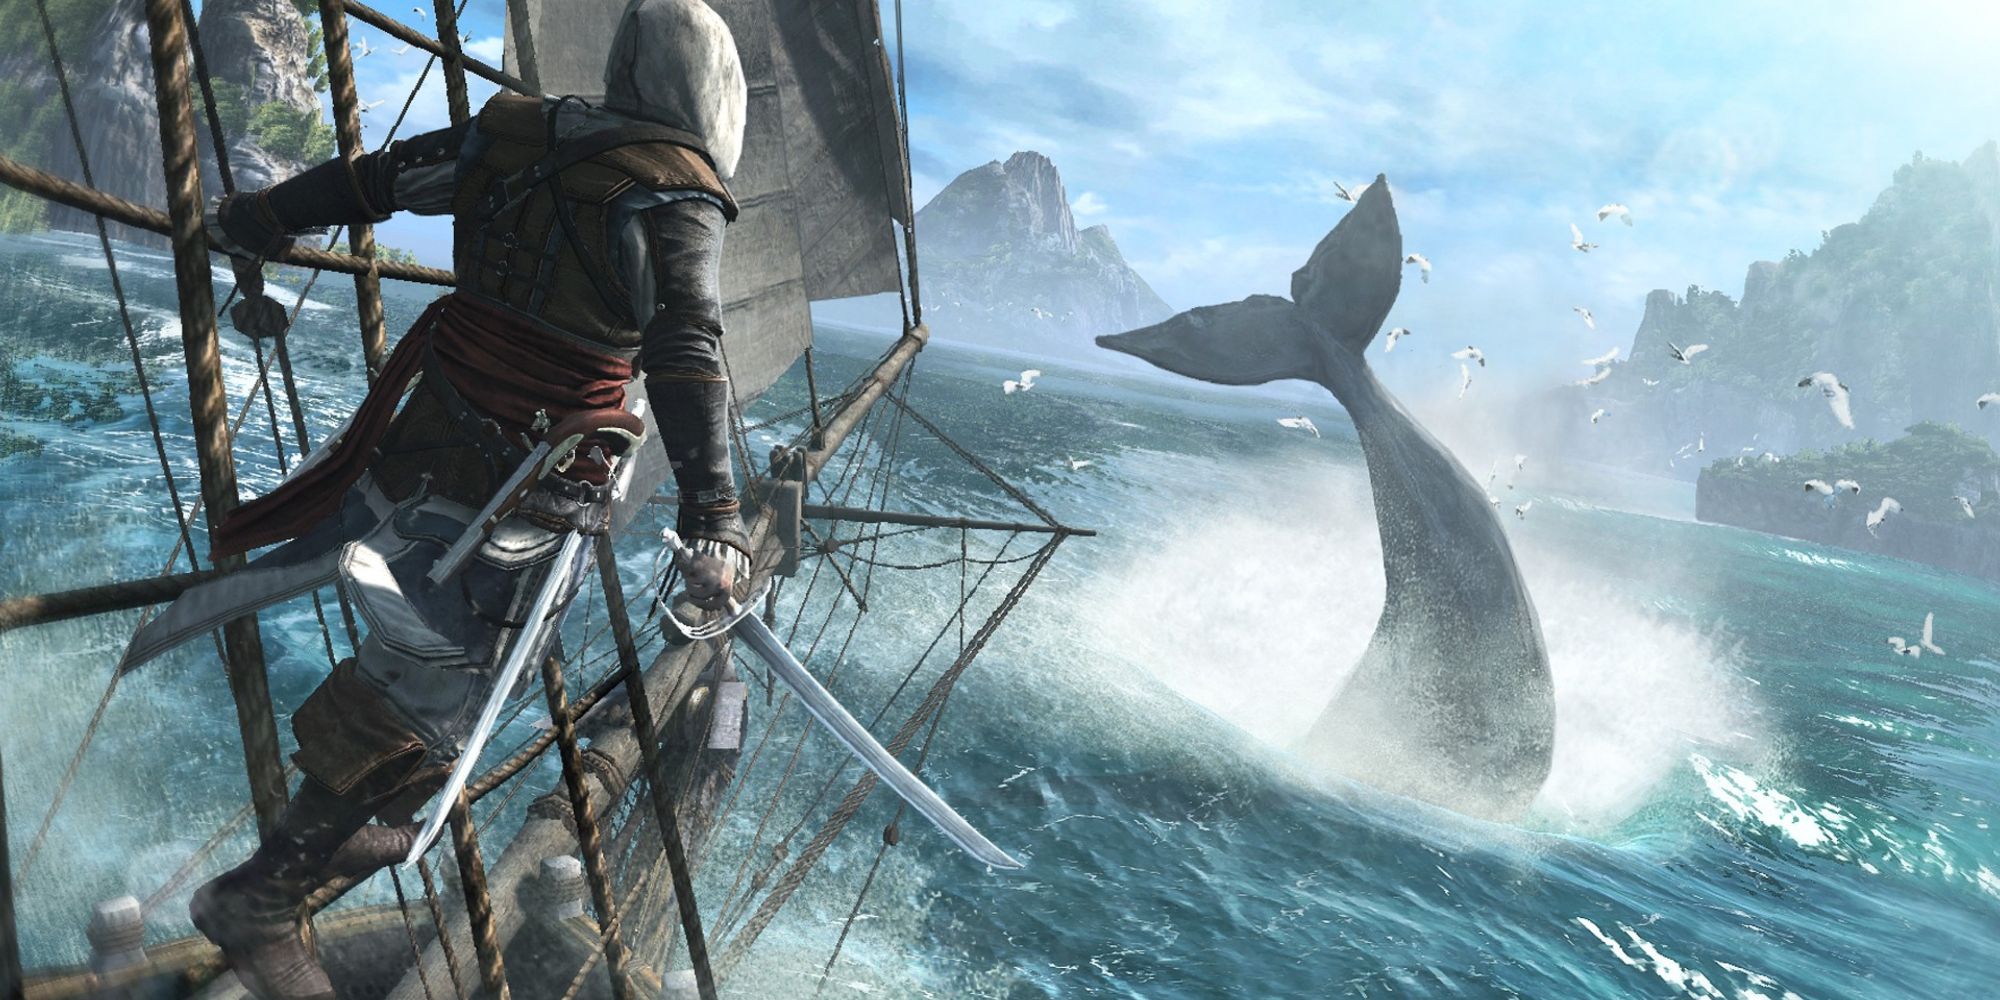 Assassin's Creed 4 Black Flag Edward Riding On Ship And Seeing Whale Jumping Out Of Ocean